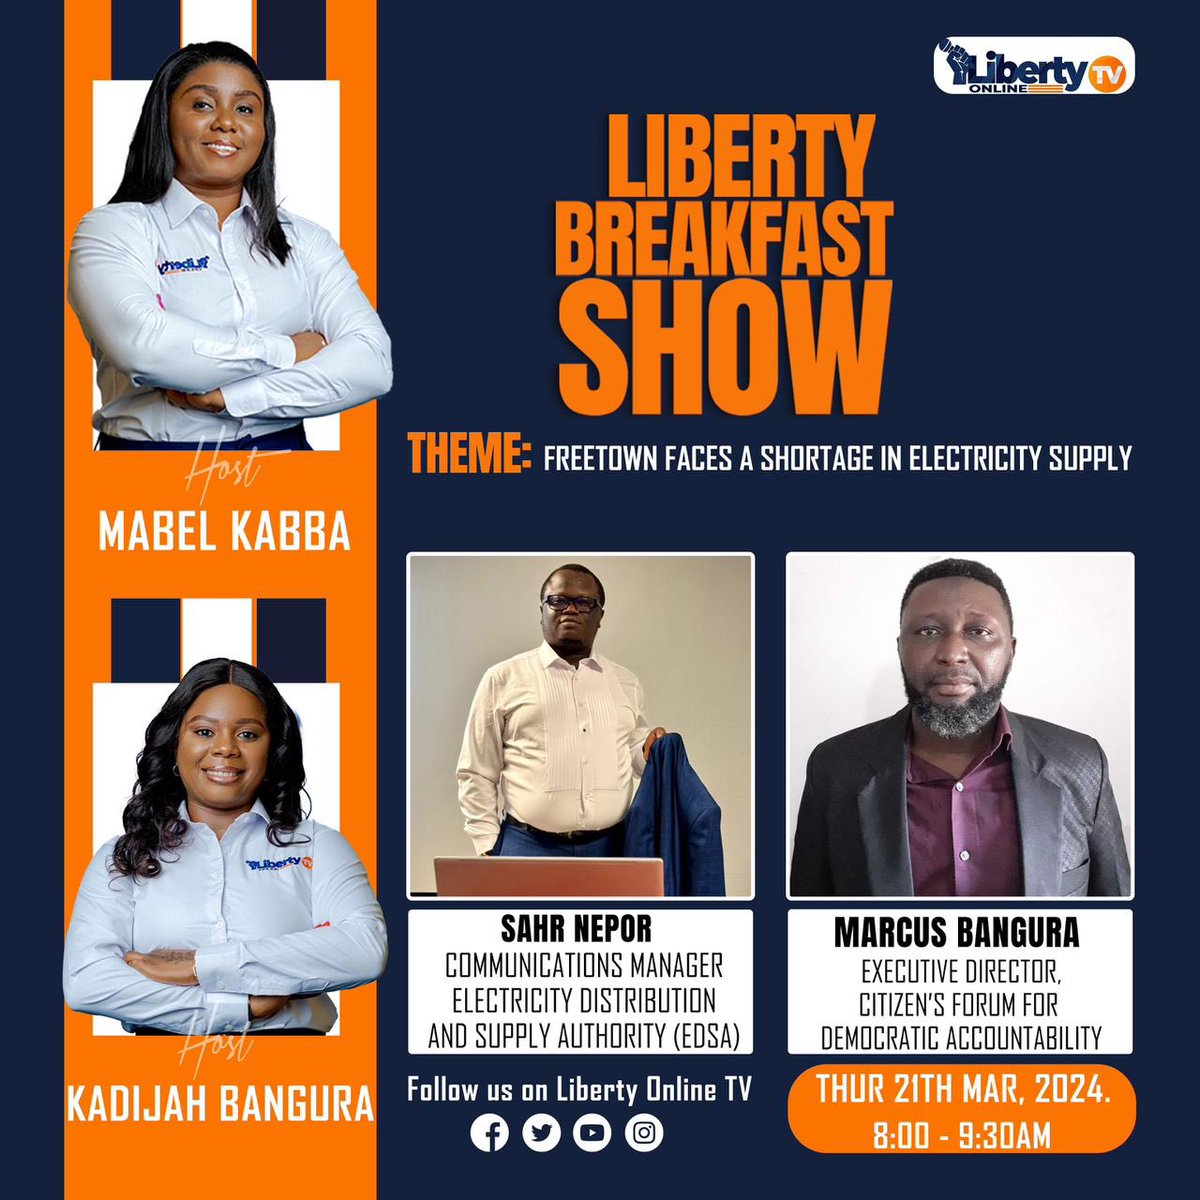 In the March 21st edition of the Liberty Breakfast Show, we'll have Sarh Nepor, Communications Manager at EDSA, discussing the factors contributing to the ongoing electricity shortage in the city.